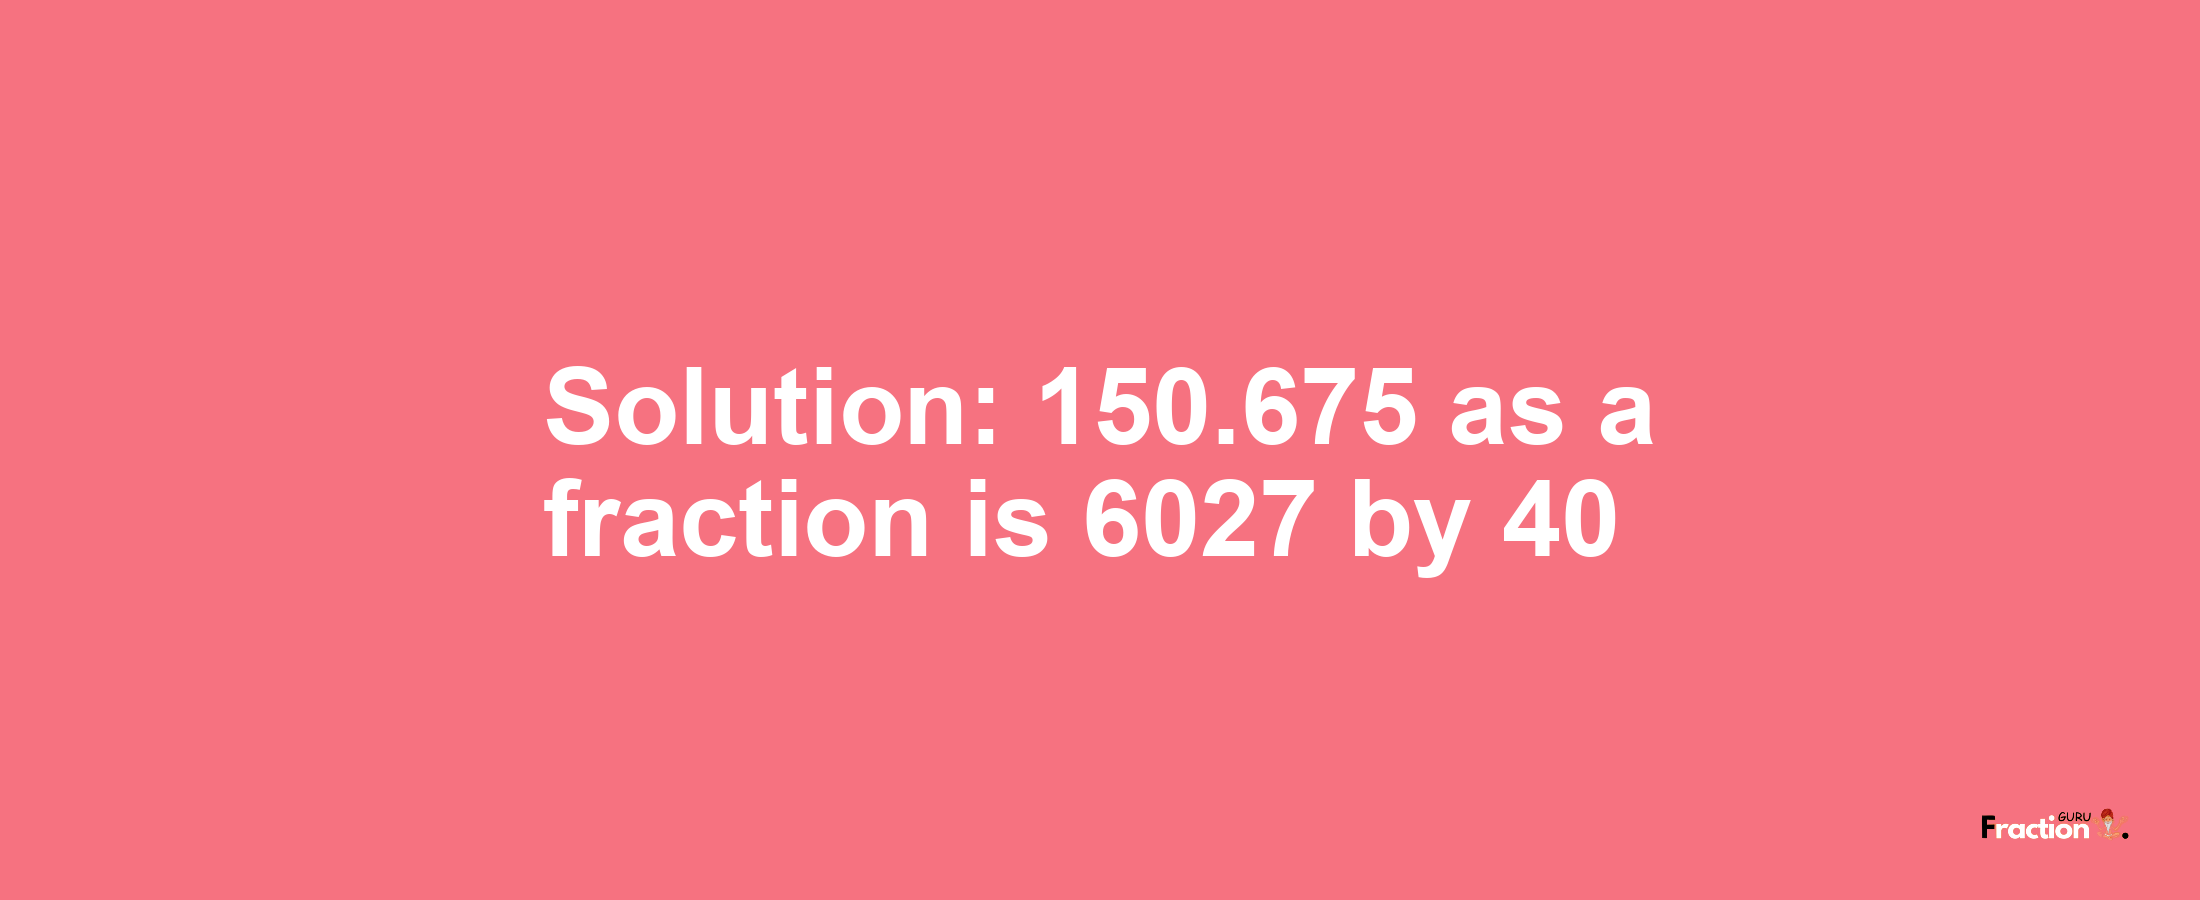 Solution:150.675 as a fraction is 6027/40